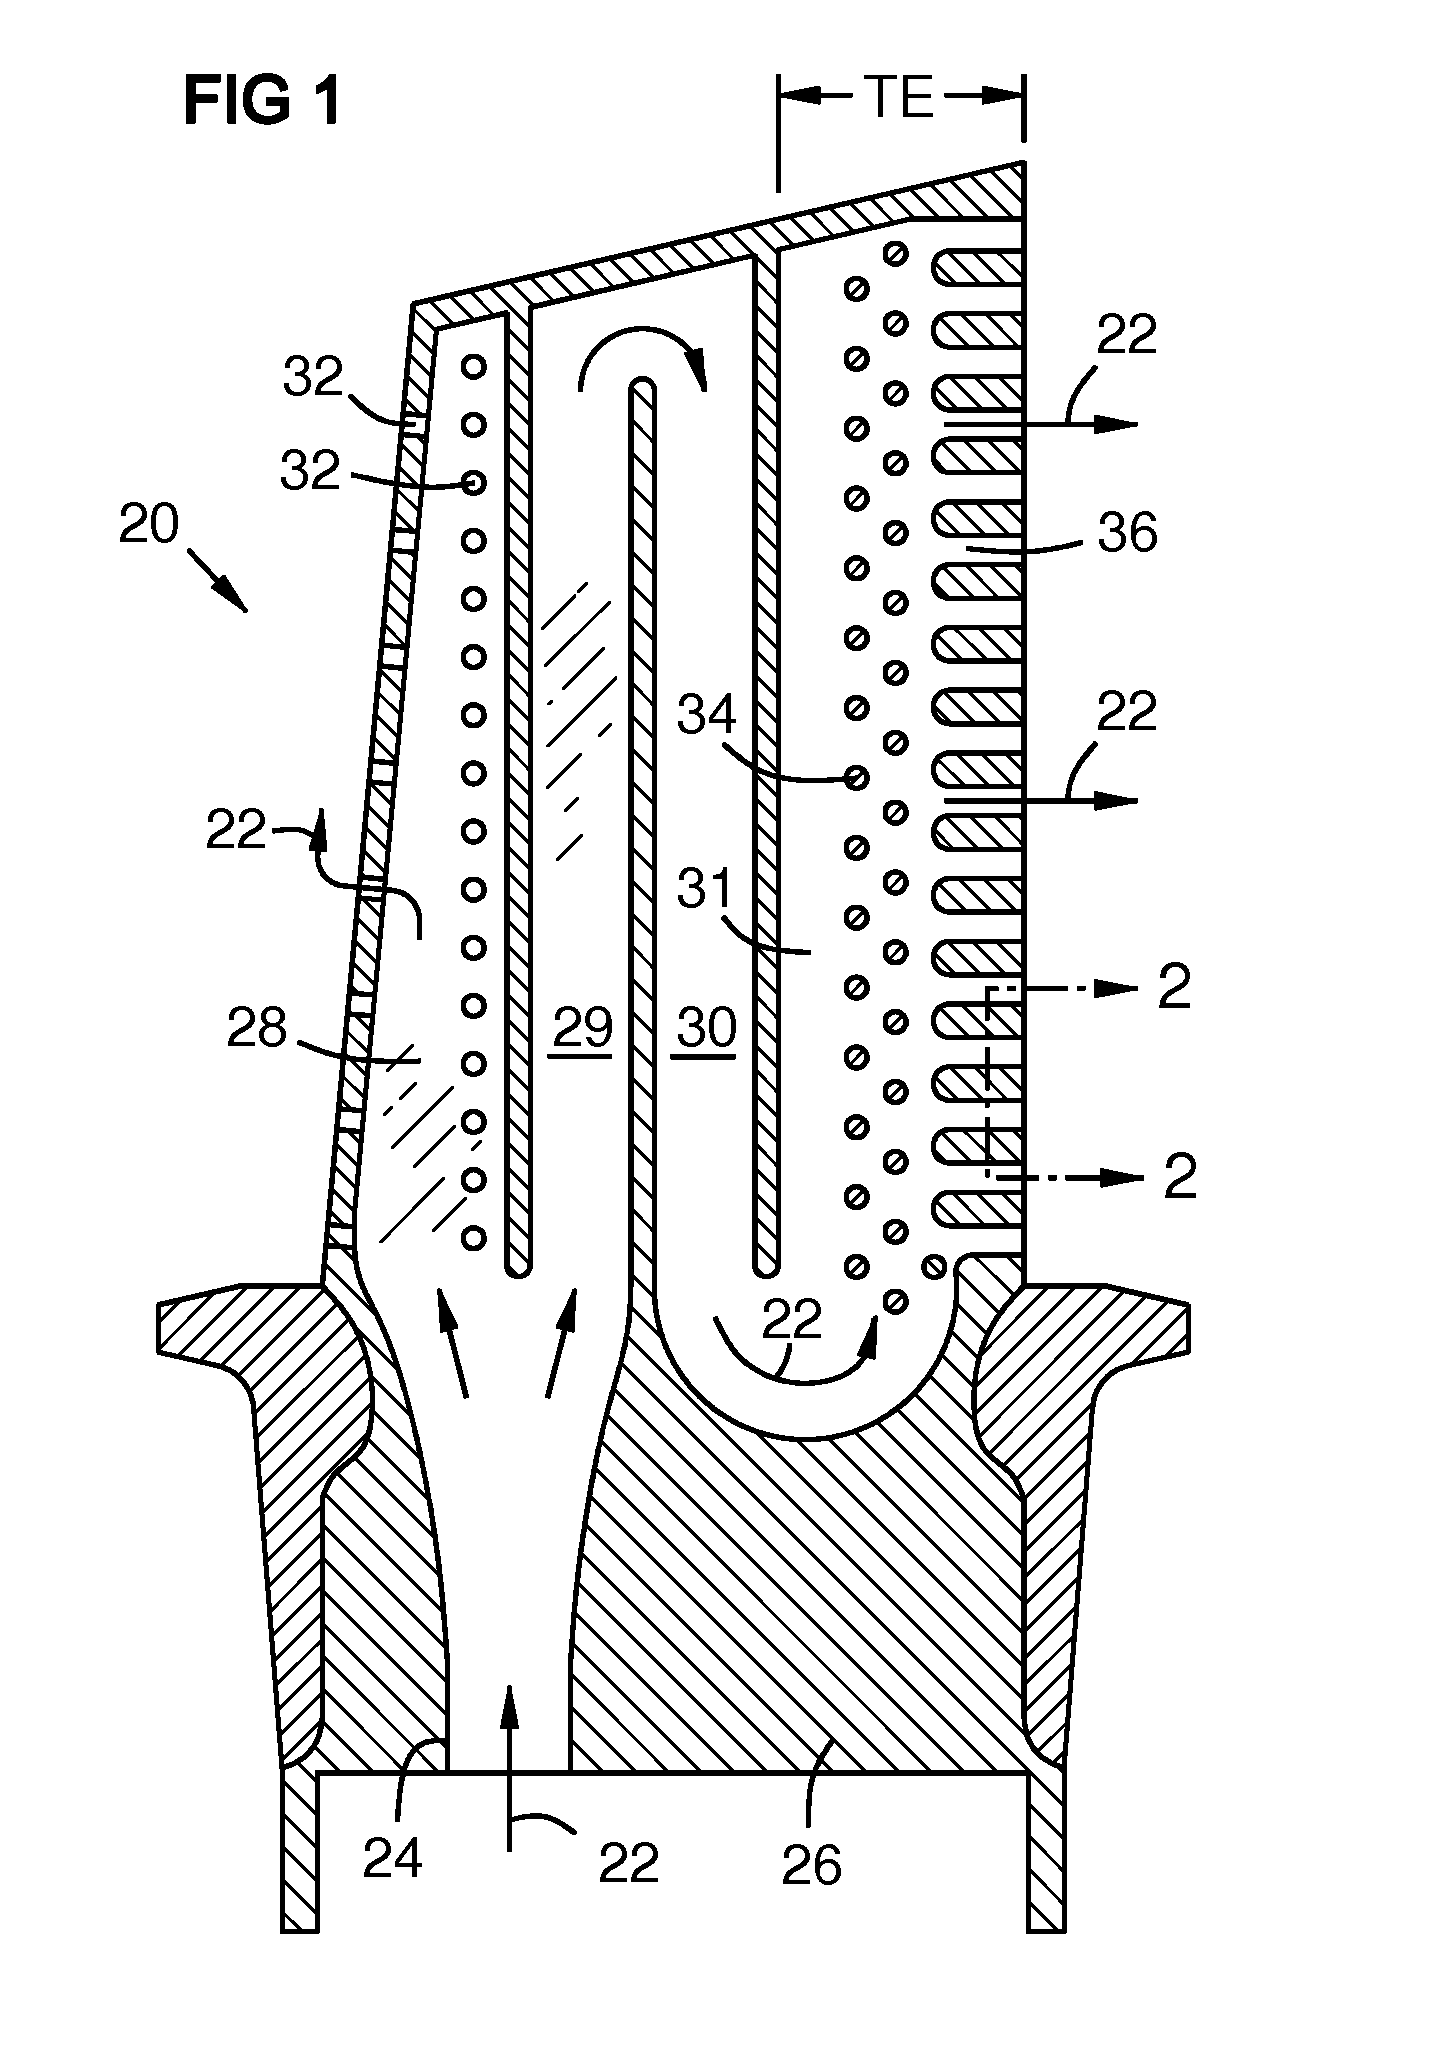 Component cooling channel